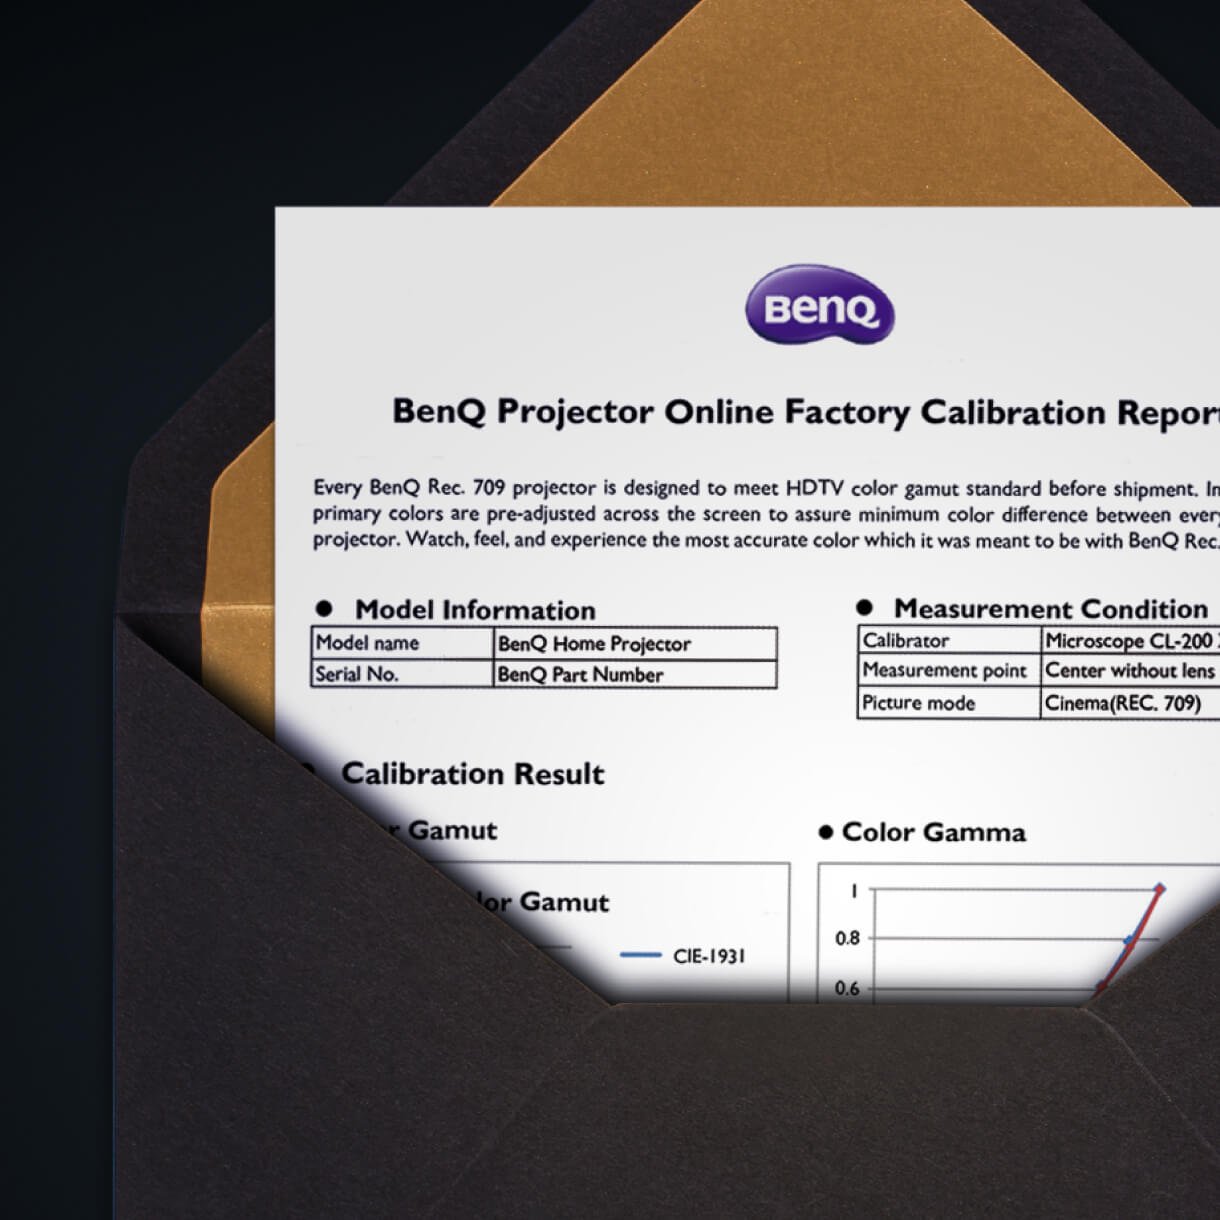 BenQ out-of-box color accuracy factory calibration report